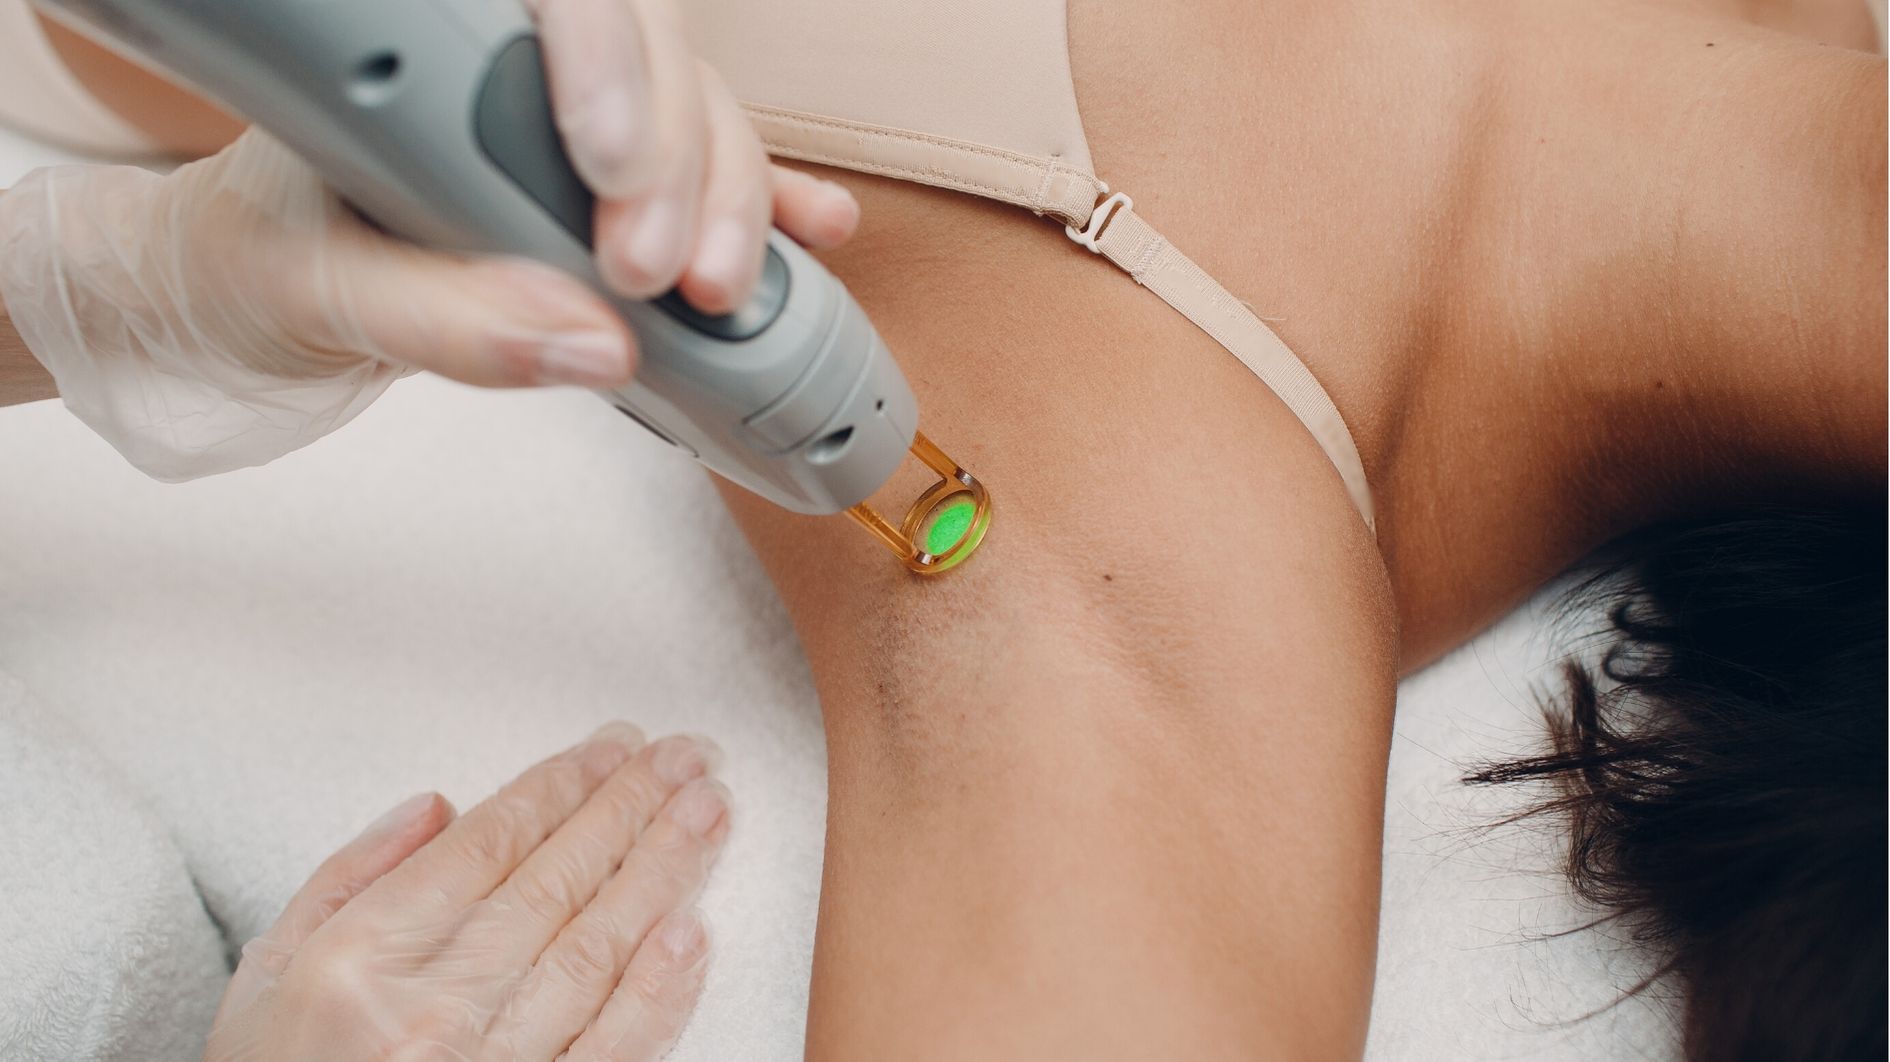 Comparison of laser hair removal with traditional methods